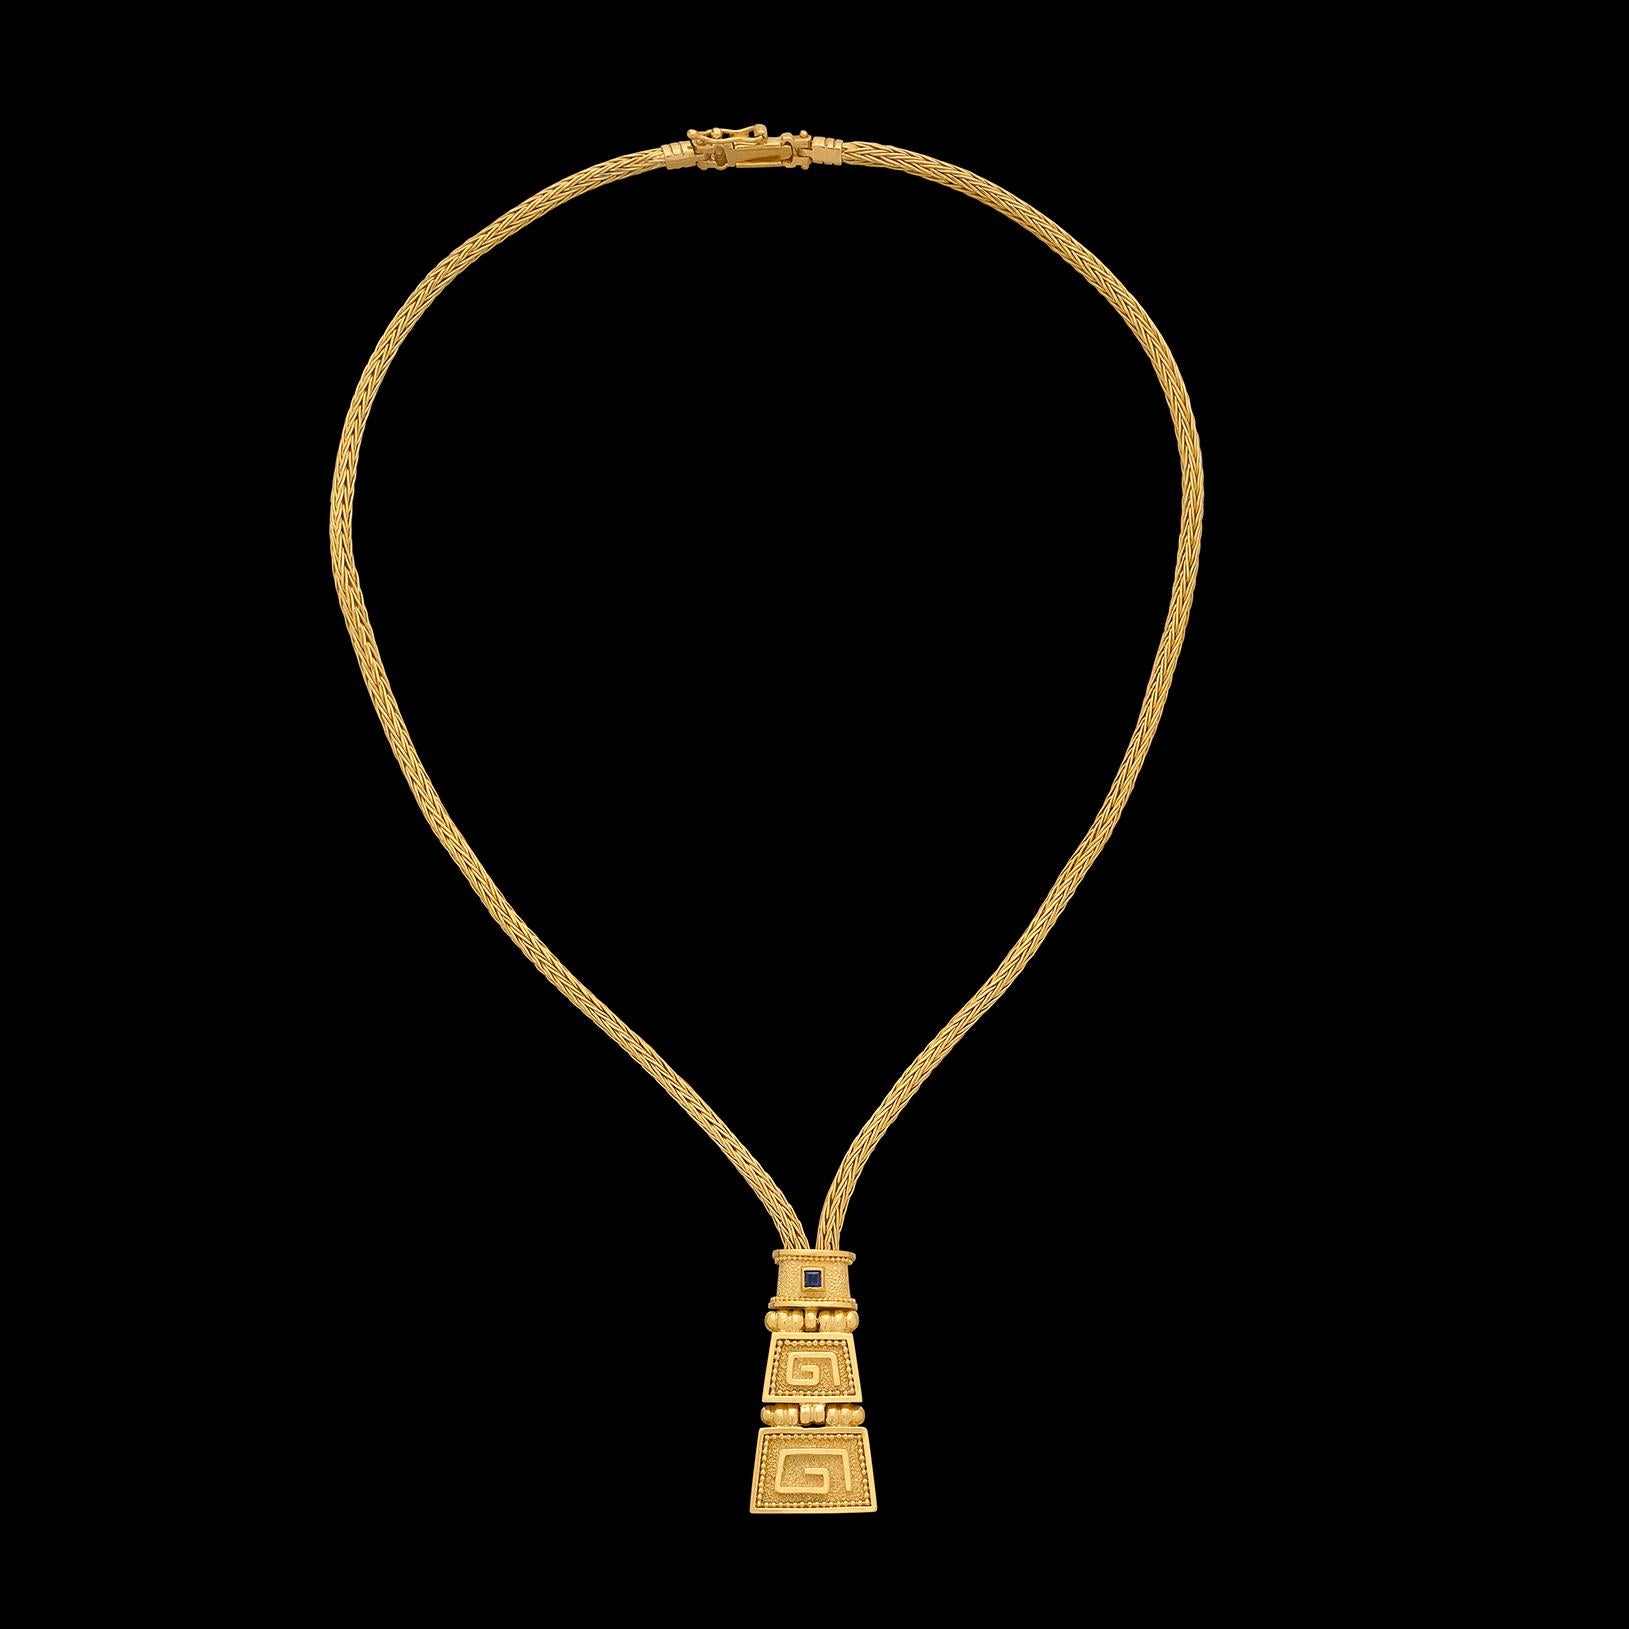 A true head-turner! This 18 karat yellow gold necklace features a gold twist chain with a Greek pattern inspired pendant suspended from it. Bezel set within the gold pendant is a single blue sapphire, adding just the perfect pop of color. The gold